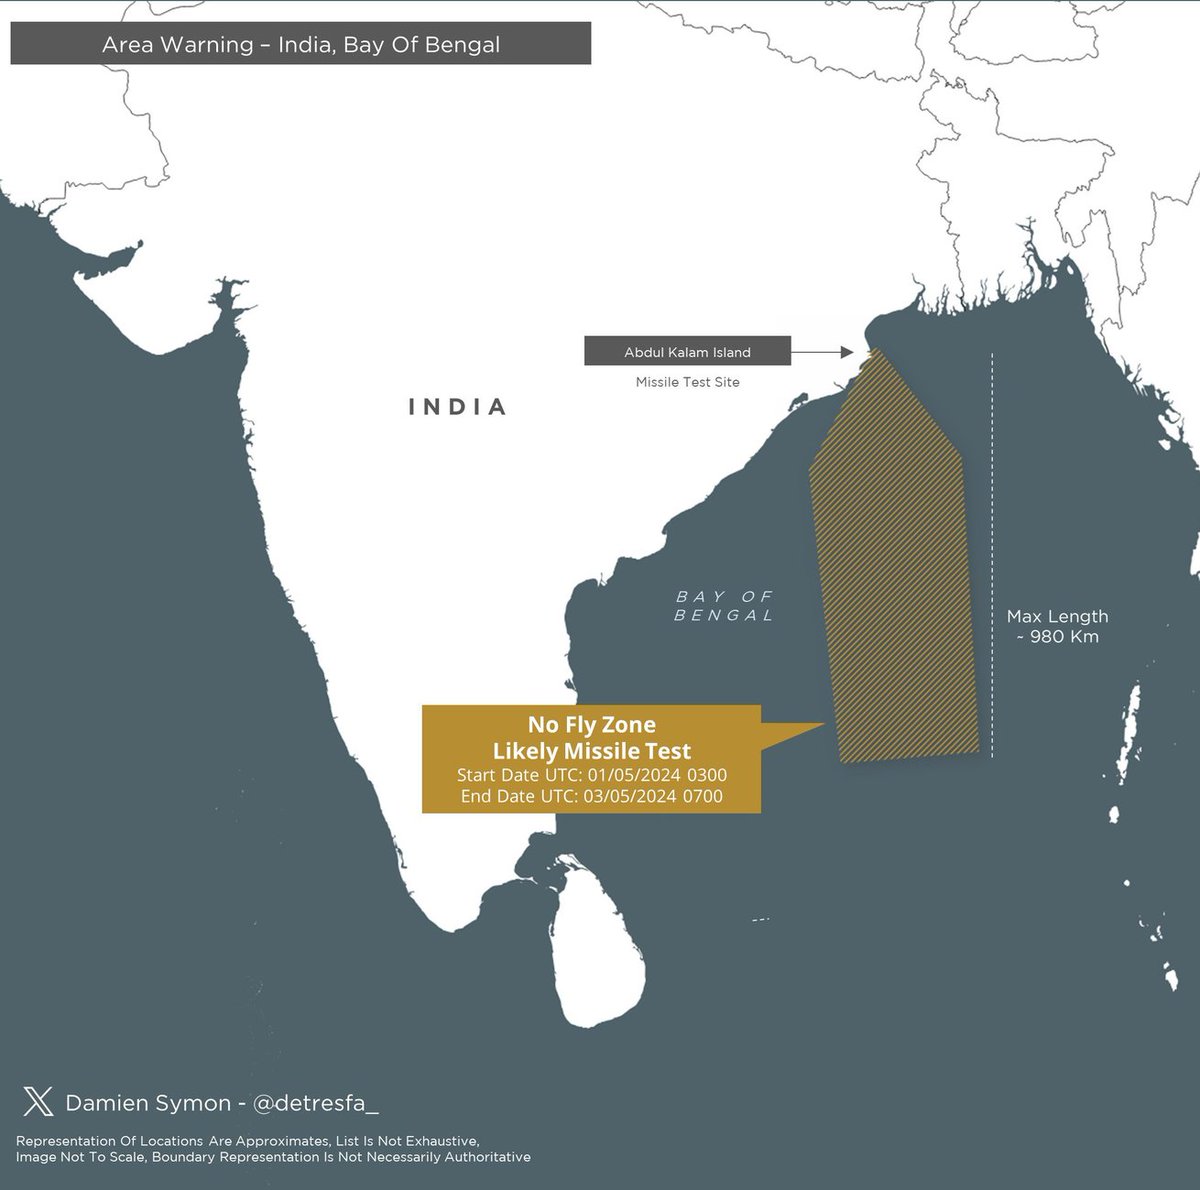 No Fly Zone Warning issued by India over the Bay Of Bengal Region A possible missile test is likely scheduled on 1st May 2024. #IADN 📷:- @detresfa_